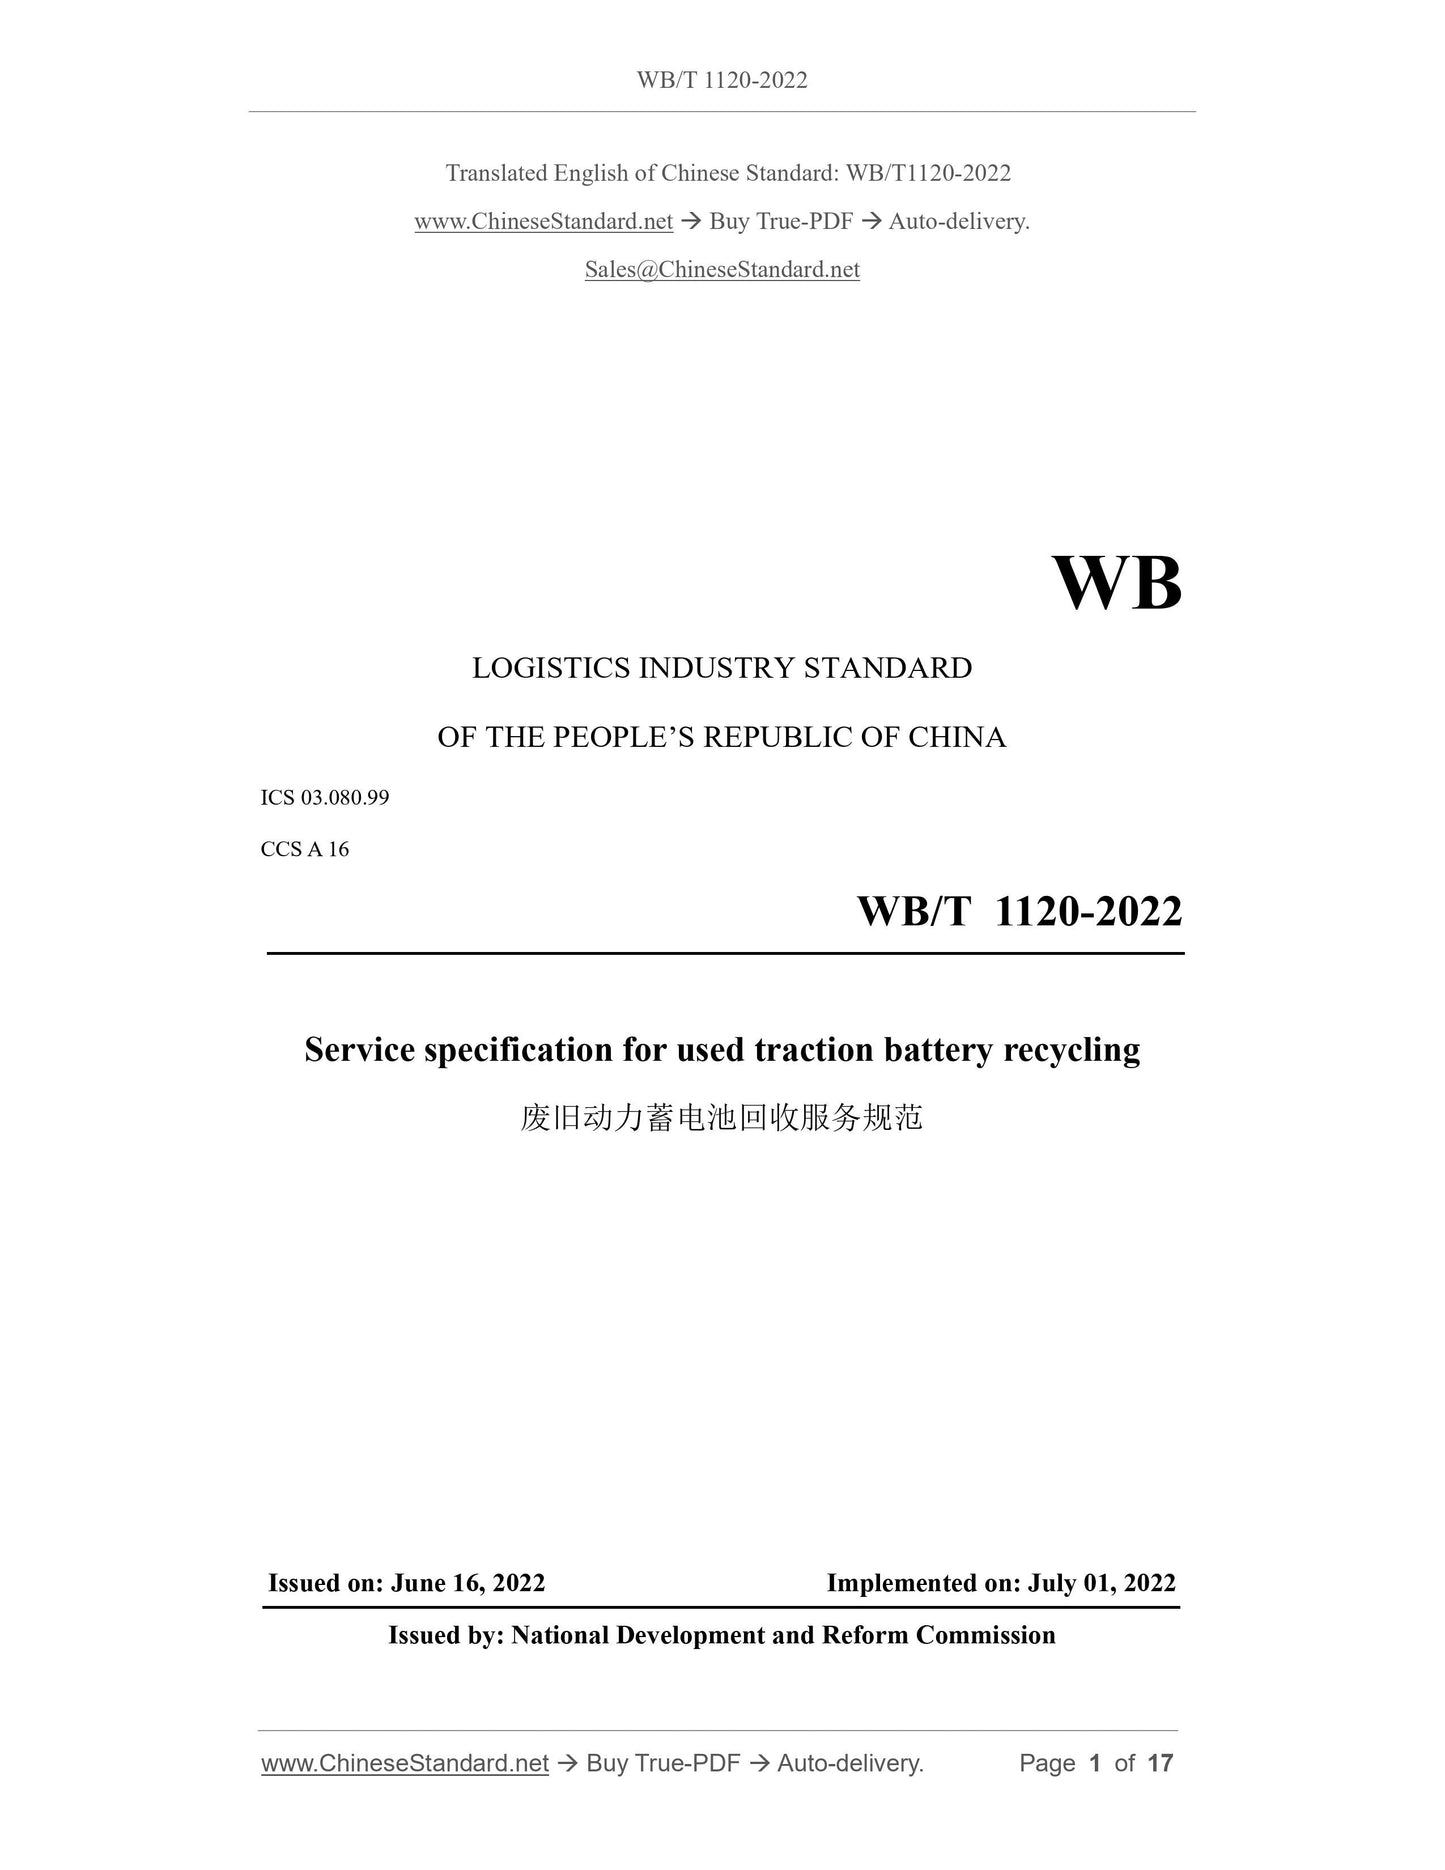 WB/T 1120-2022 Page 1